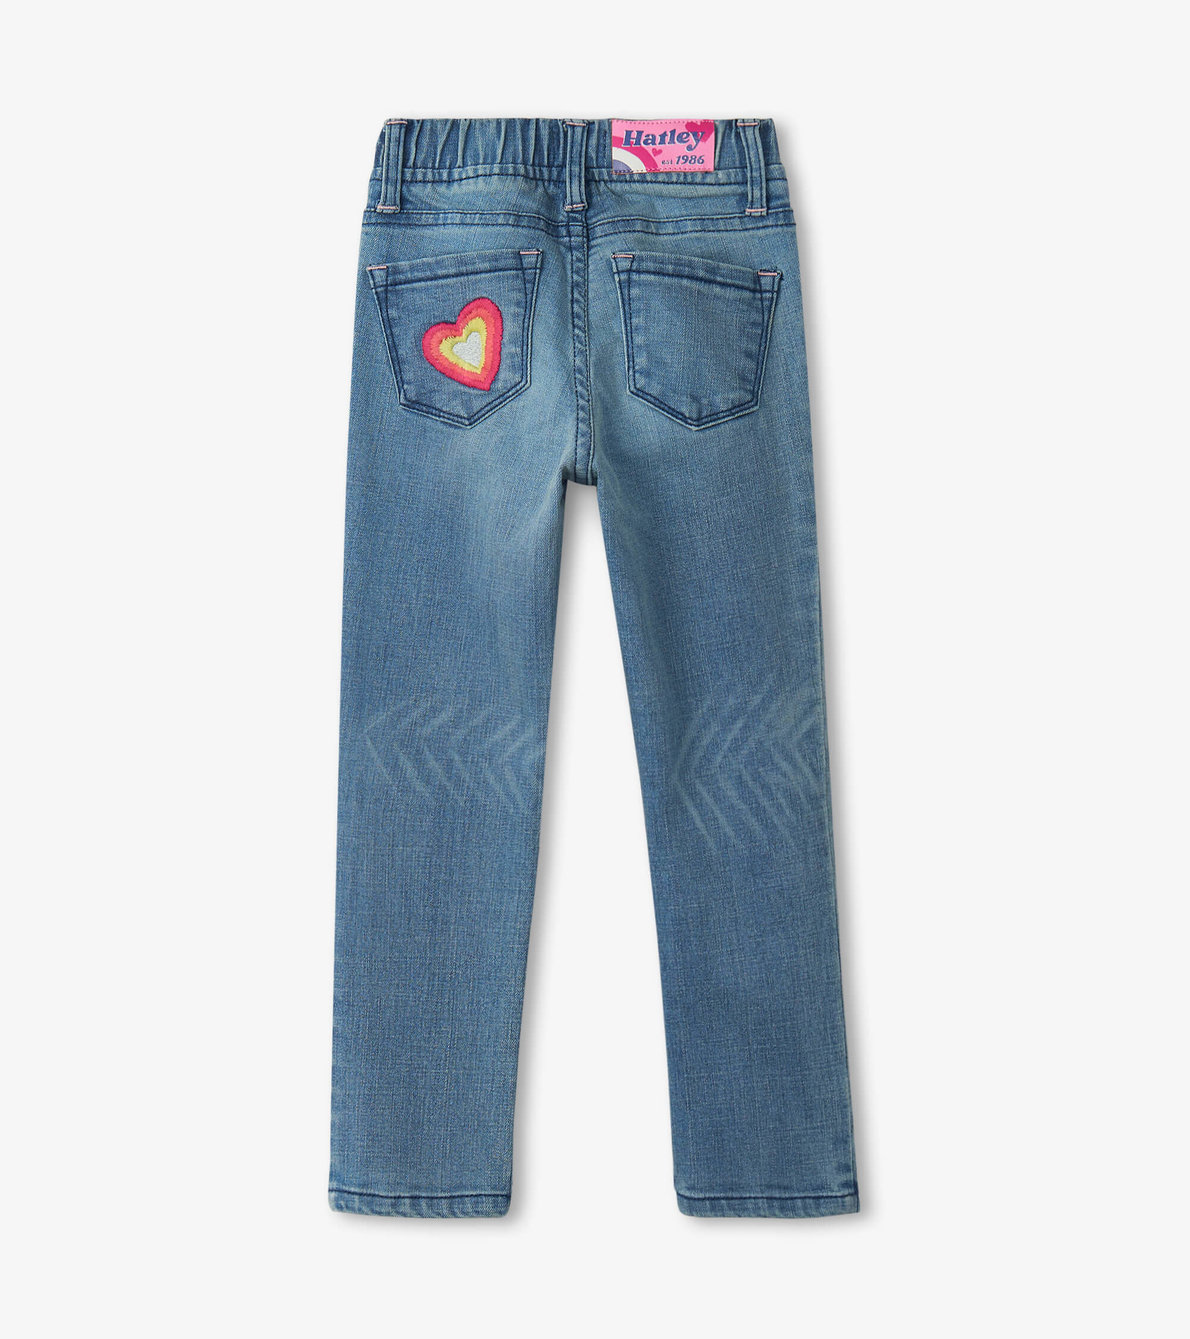 View larger image of Girls Pretty Patches Stretch Jeans